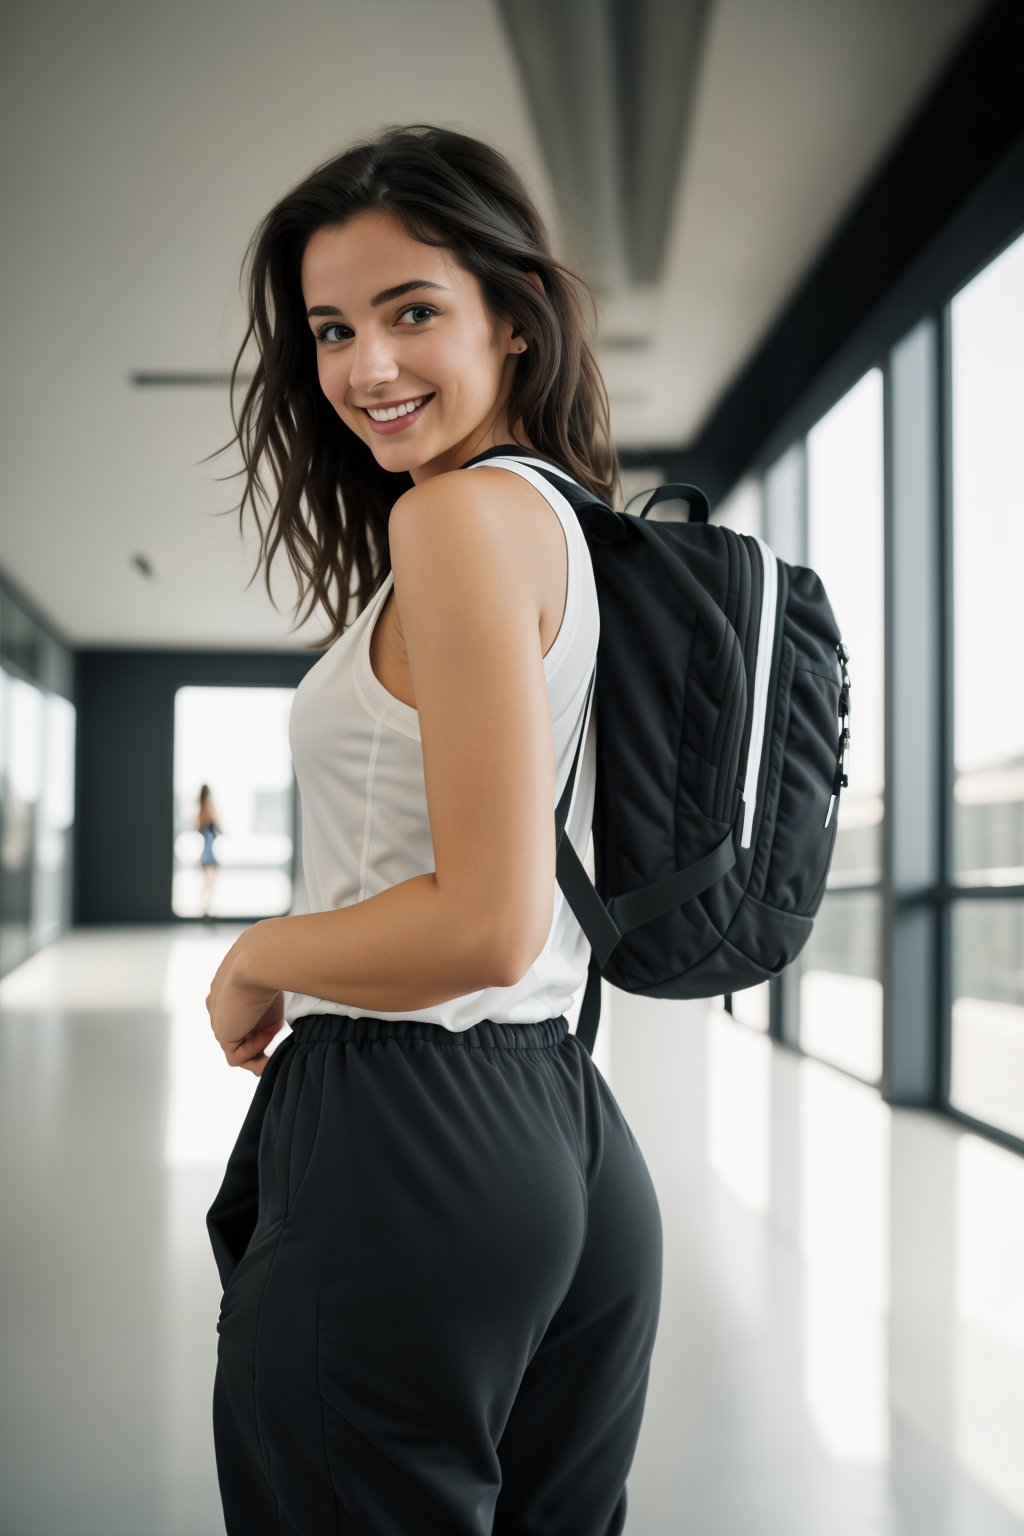 masterpiece, beautiful (sexy 1.3) brunette girl, running, runaway, inside creative office, smiling, backpack, jumpsuit, black hair, rear view, petite face, natural light, UHD 4k, photorealistic,